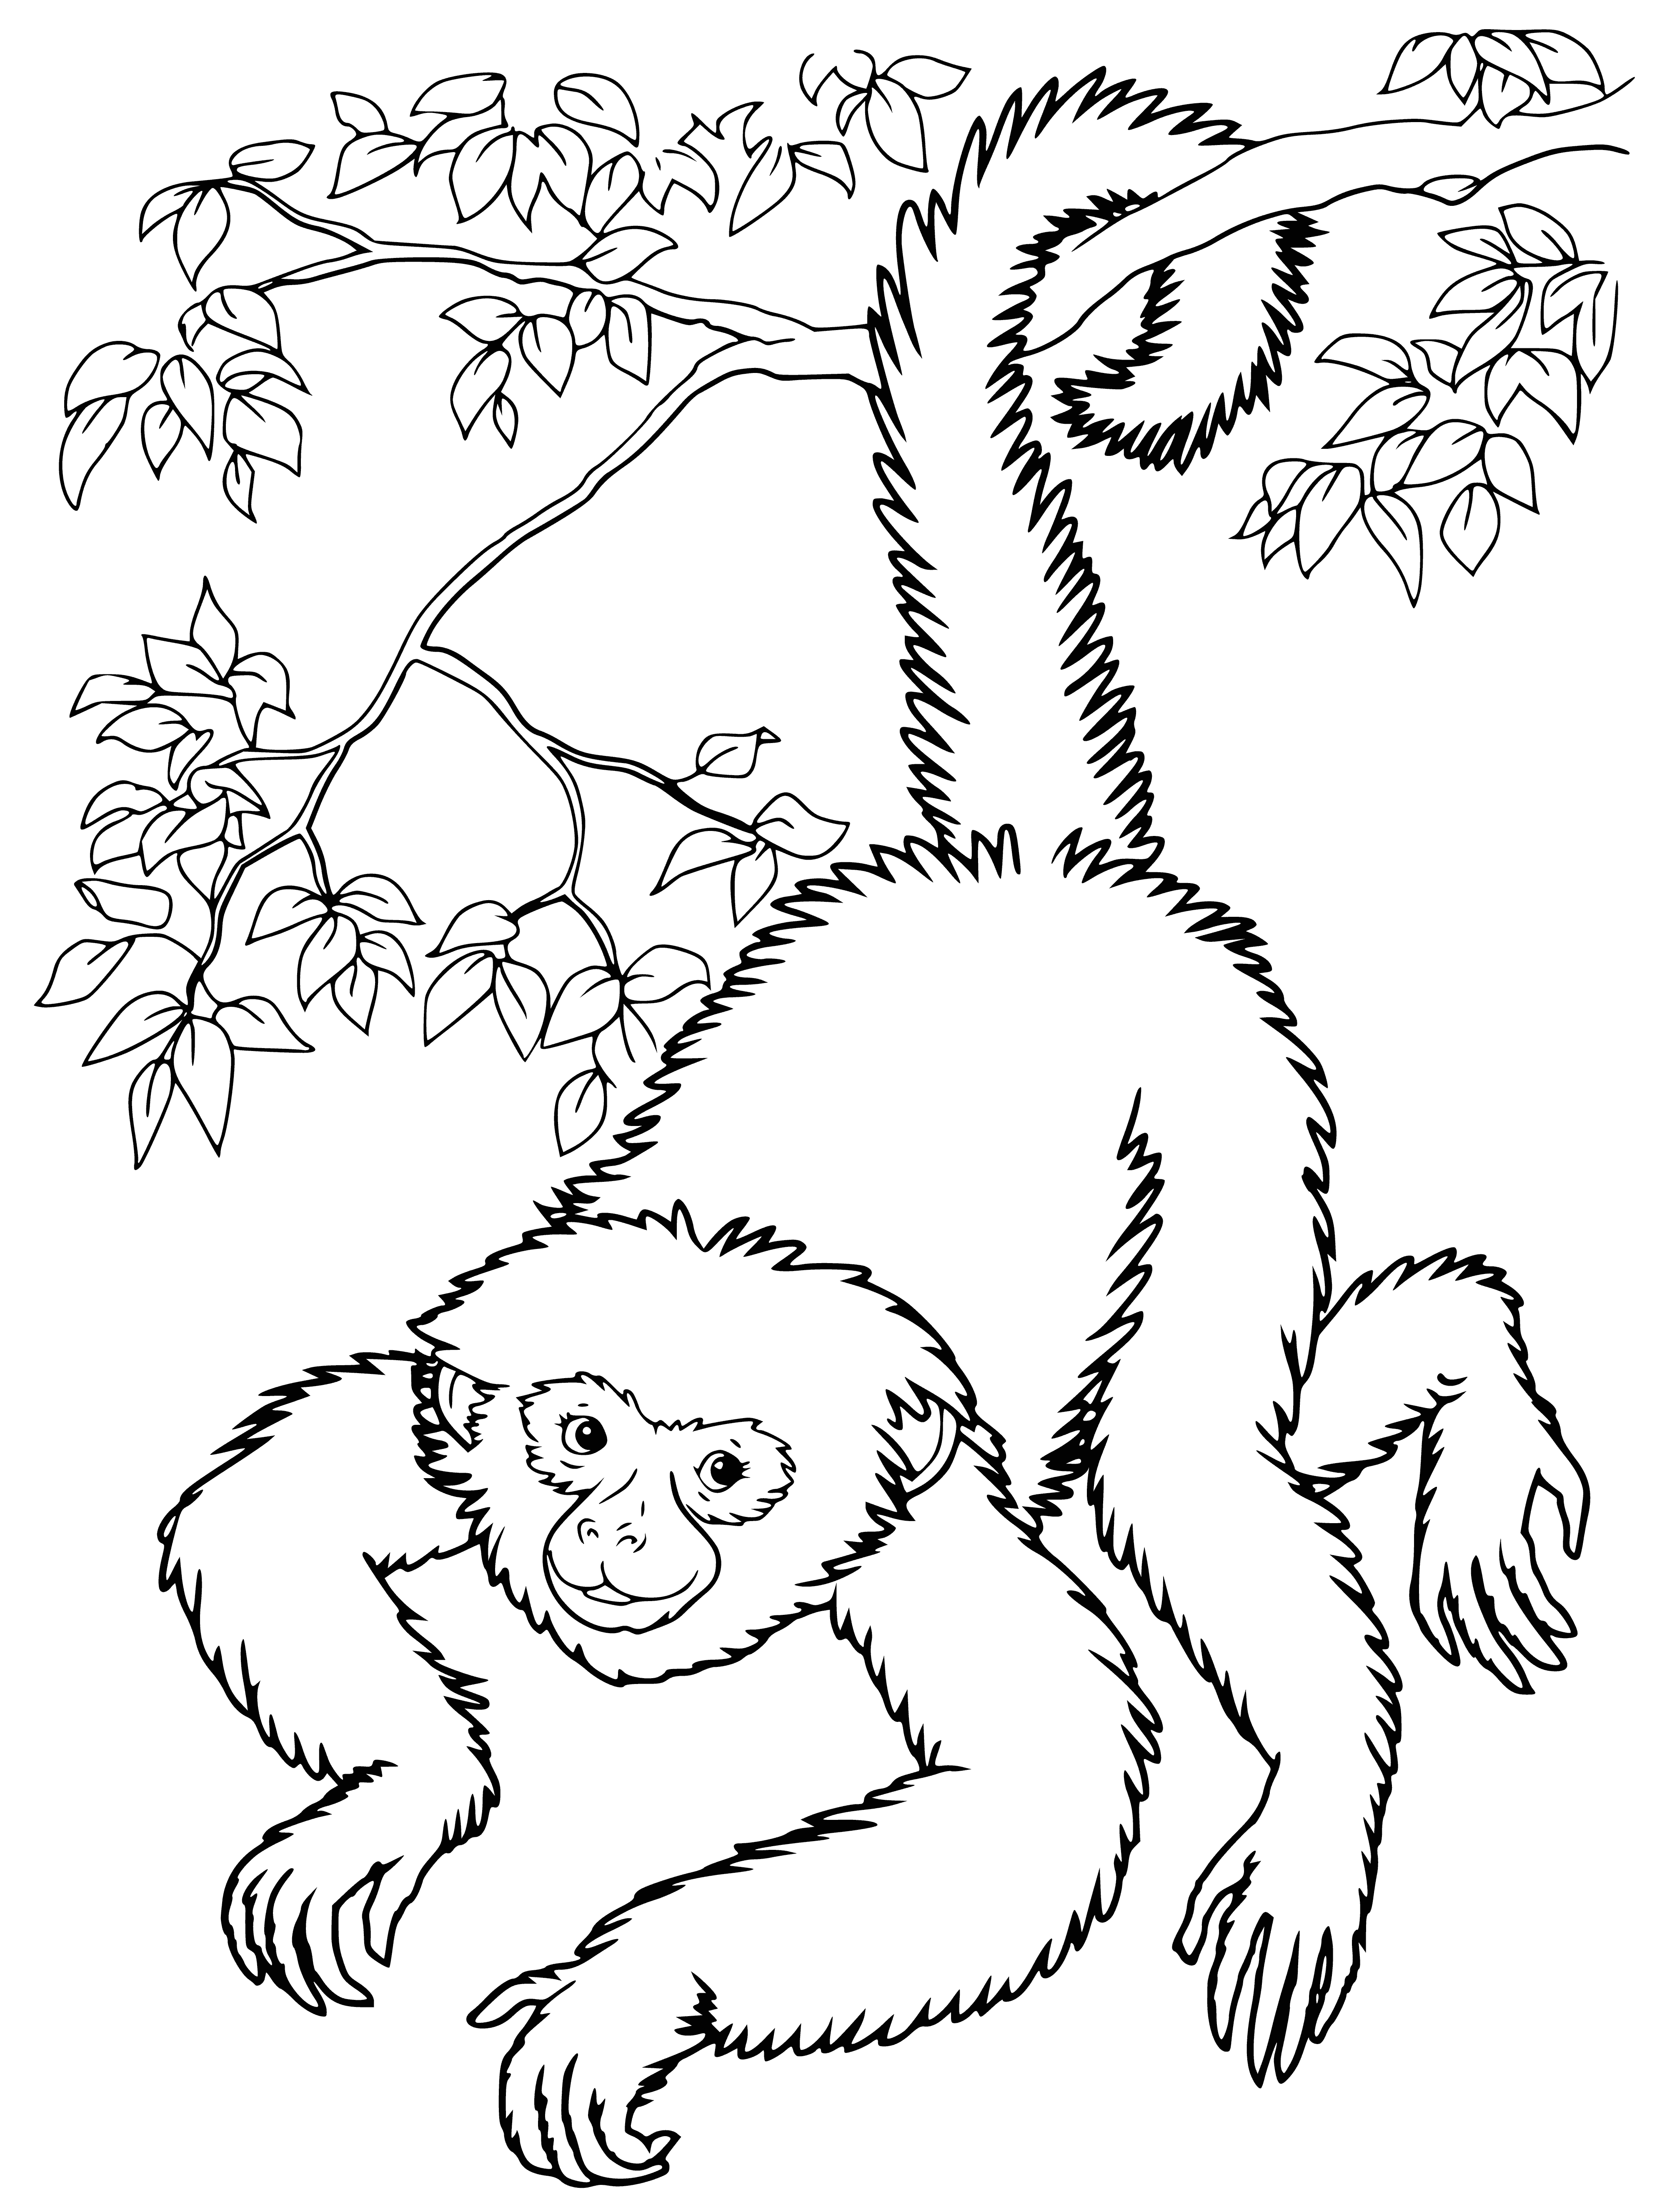 coloring page: 5 monkeys in coloring page—3 w/ eyes covered, 1 w/ mouth, 1 w/ eyes & mouth open.